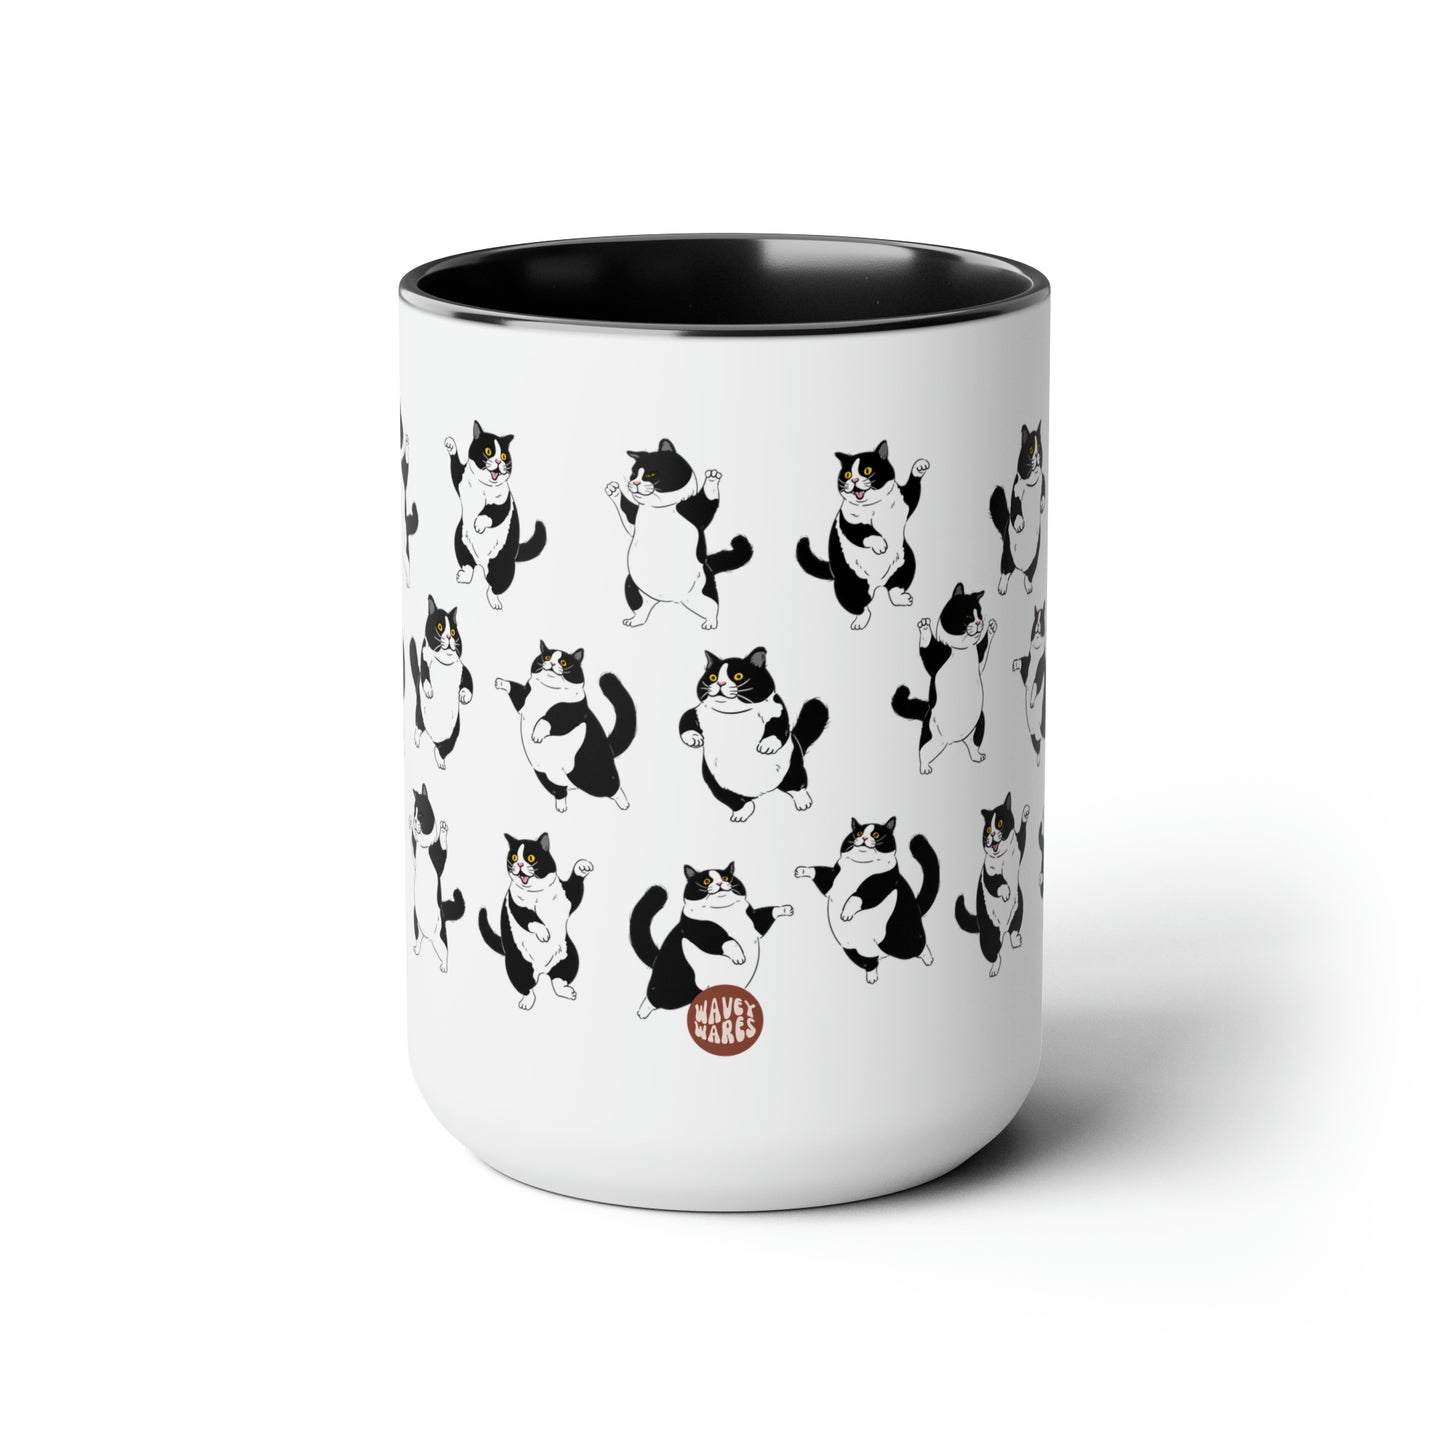 Tuxedo Cat 15oz white with black accent funny large coffee mug gift for her him feline cat lover furparent waveywares wavey wares wavywares wavy wares side